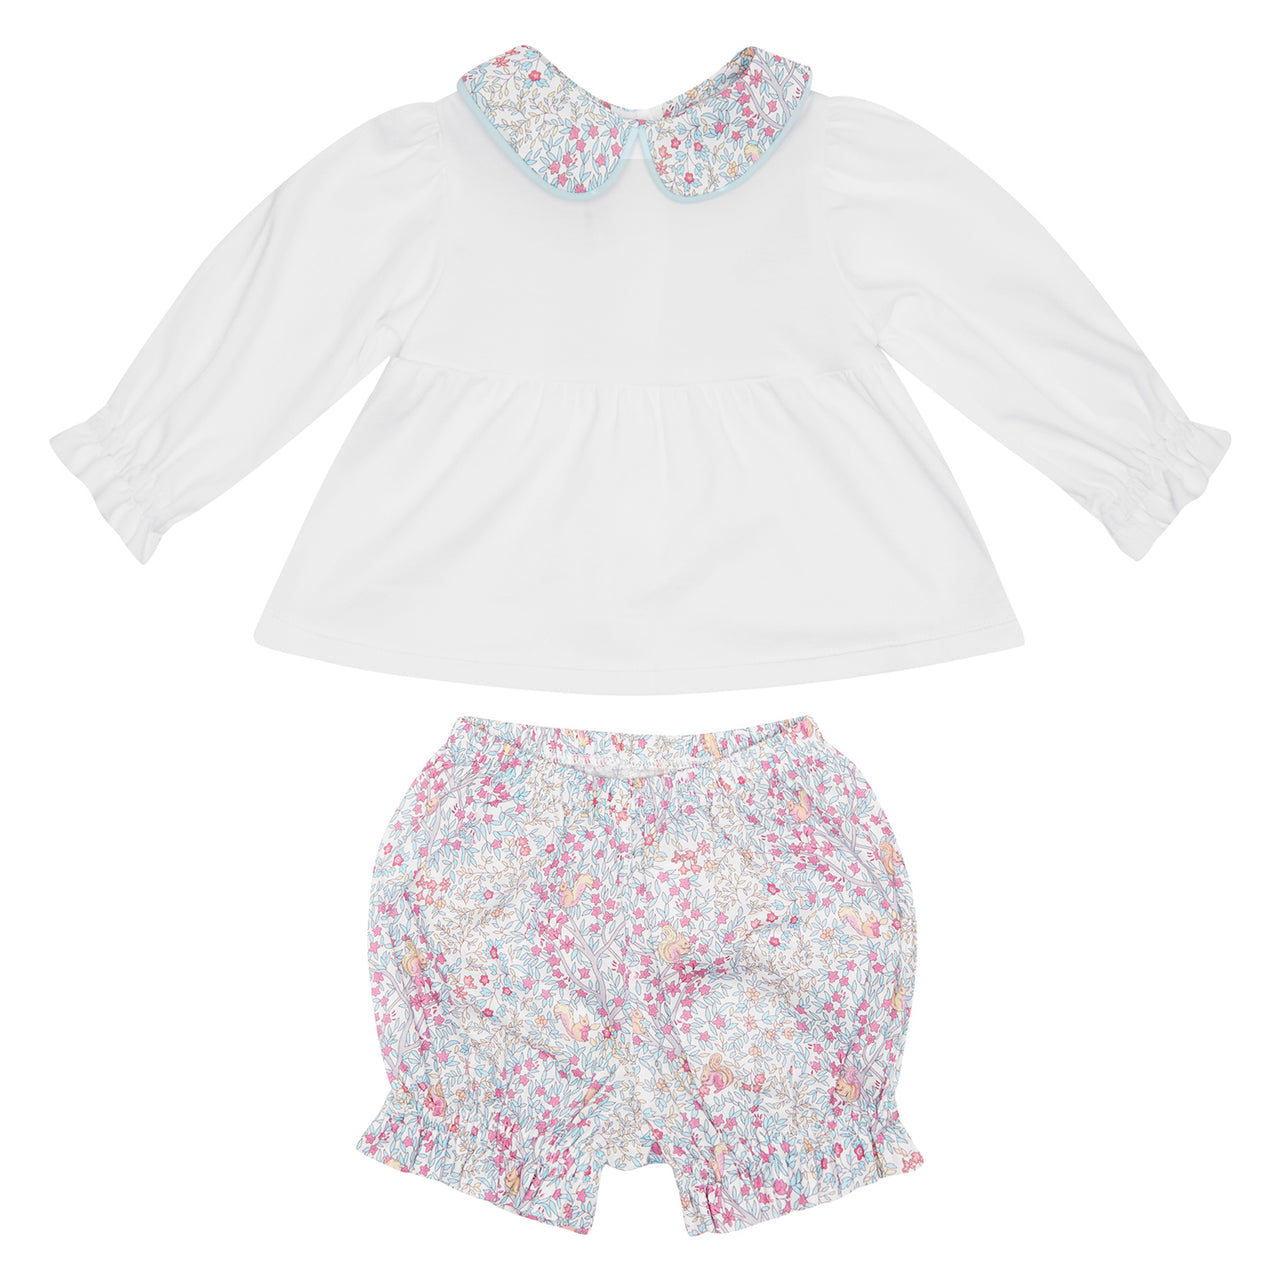 Allie Bloomer Set - White Pima Top With Chickering Floral Peter Pan Coller And Bloomer